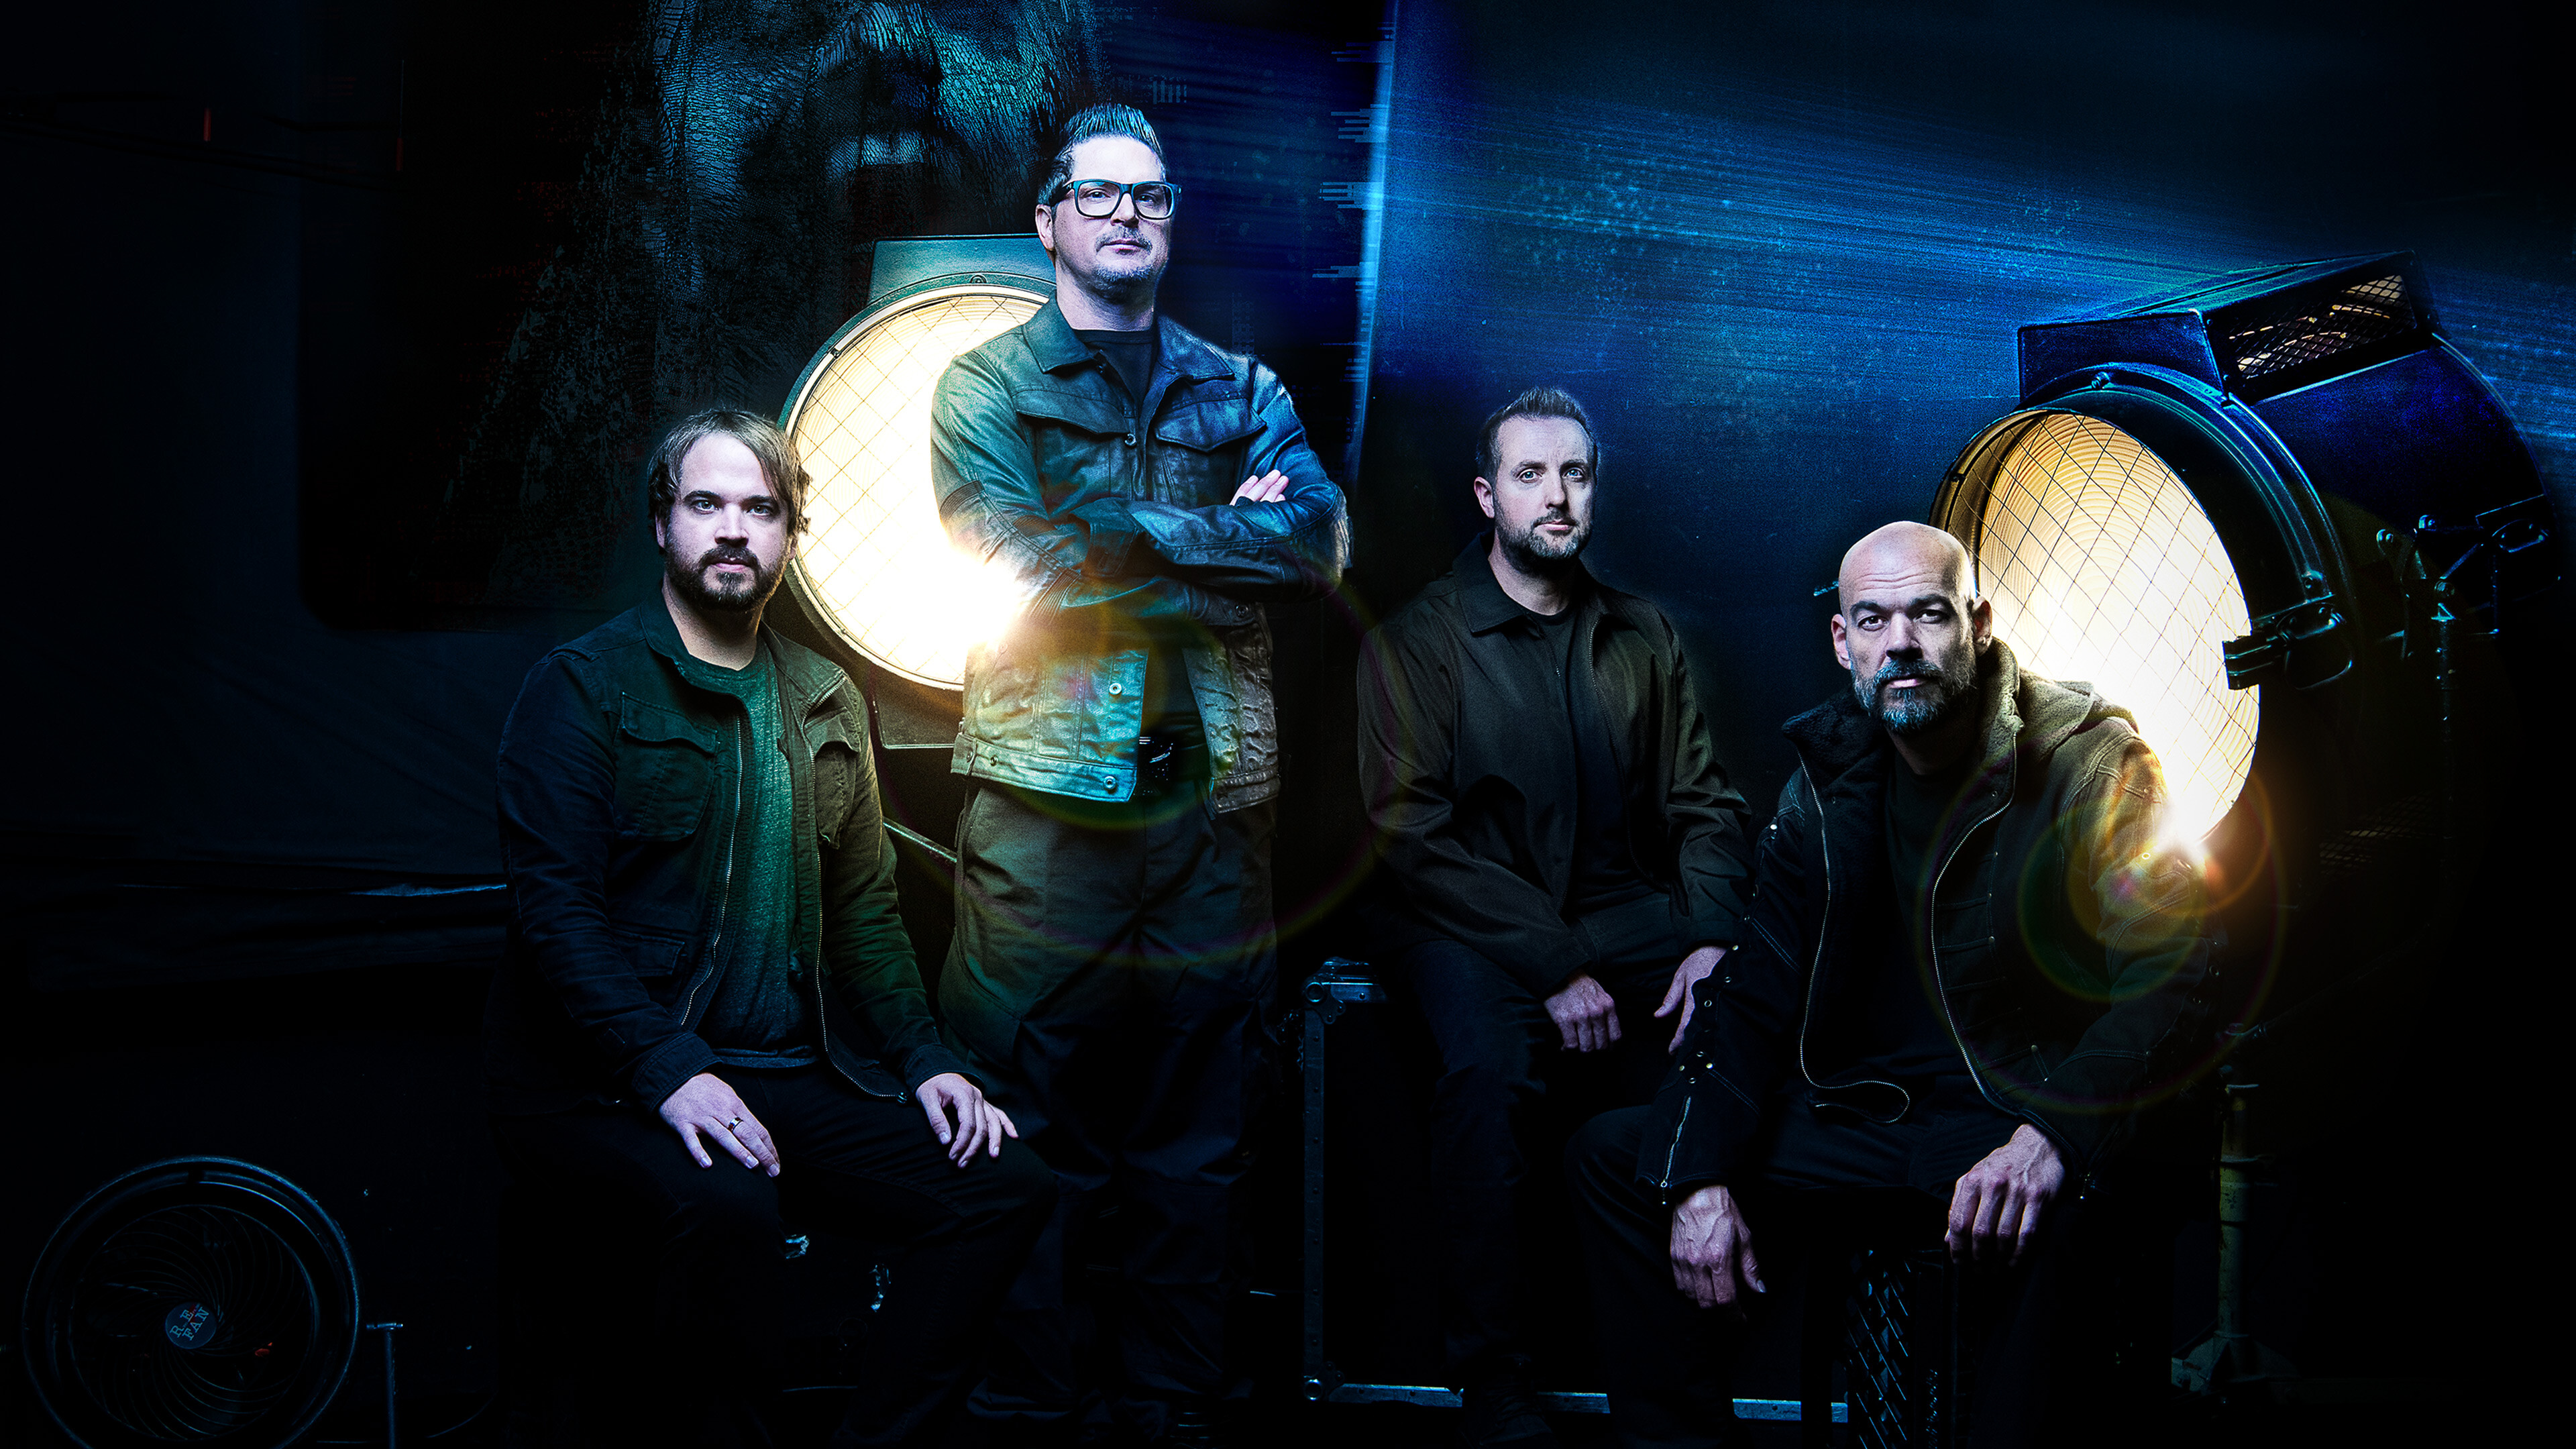 Ghost Adventures (TV Series): Zak Bagans, Aaron Goodwin, Billy Tolley, and Jay Wasley investigate reportedly haunted locations. 3840x2160 4K Background.